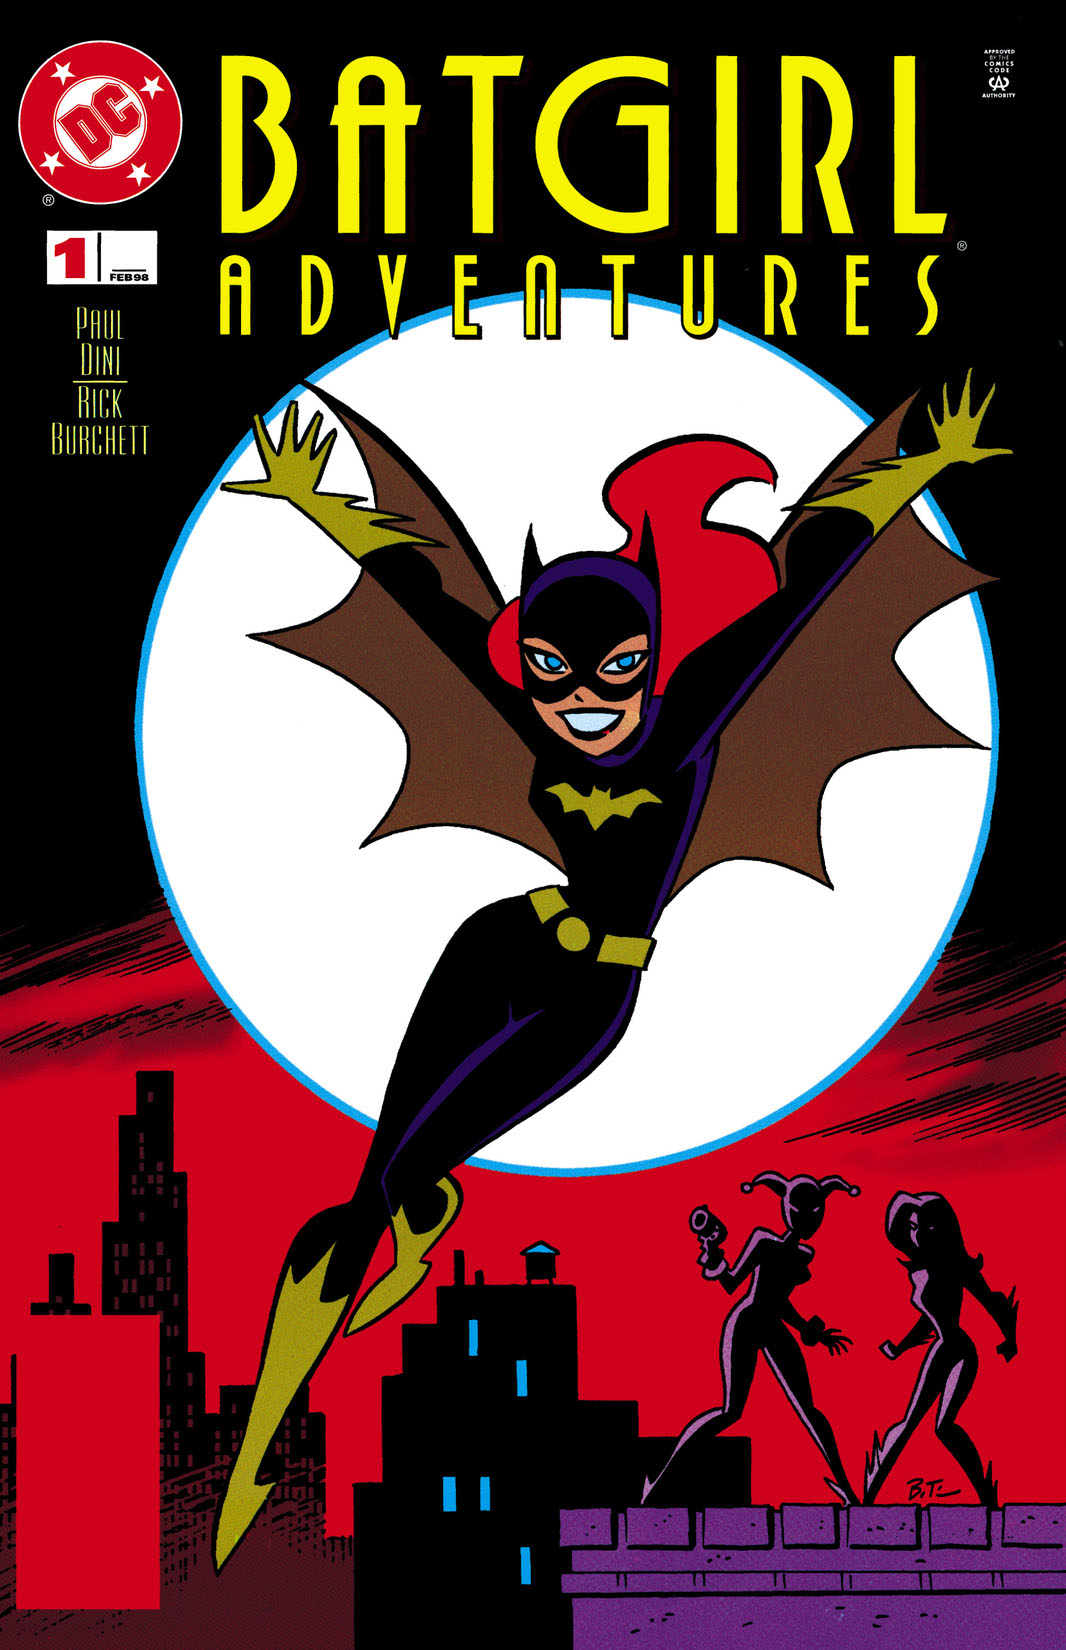 The Batgirl Adventures (1997-) #1 preview images